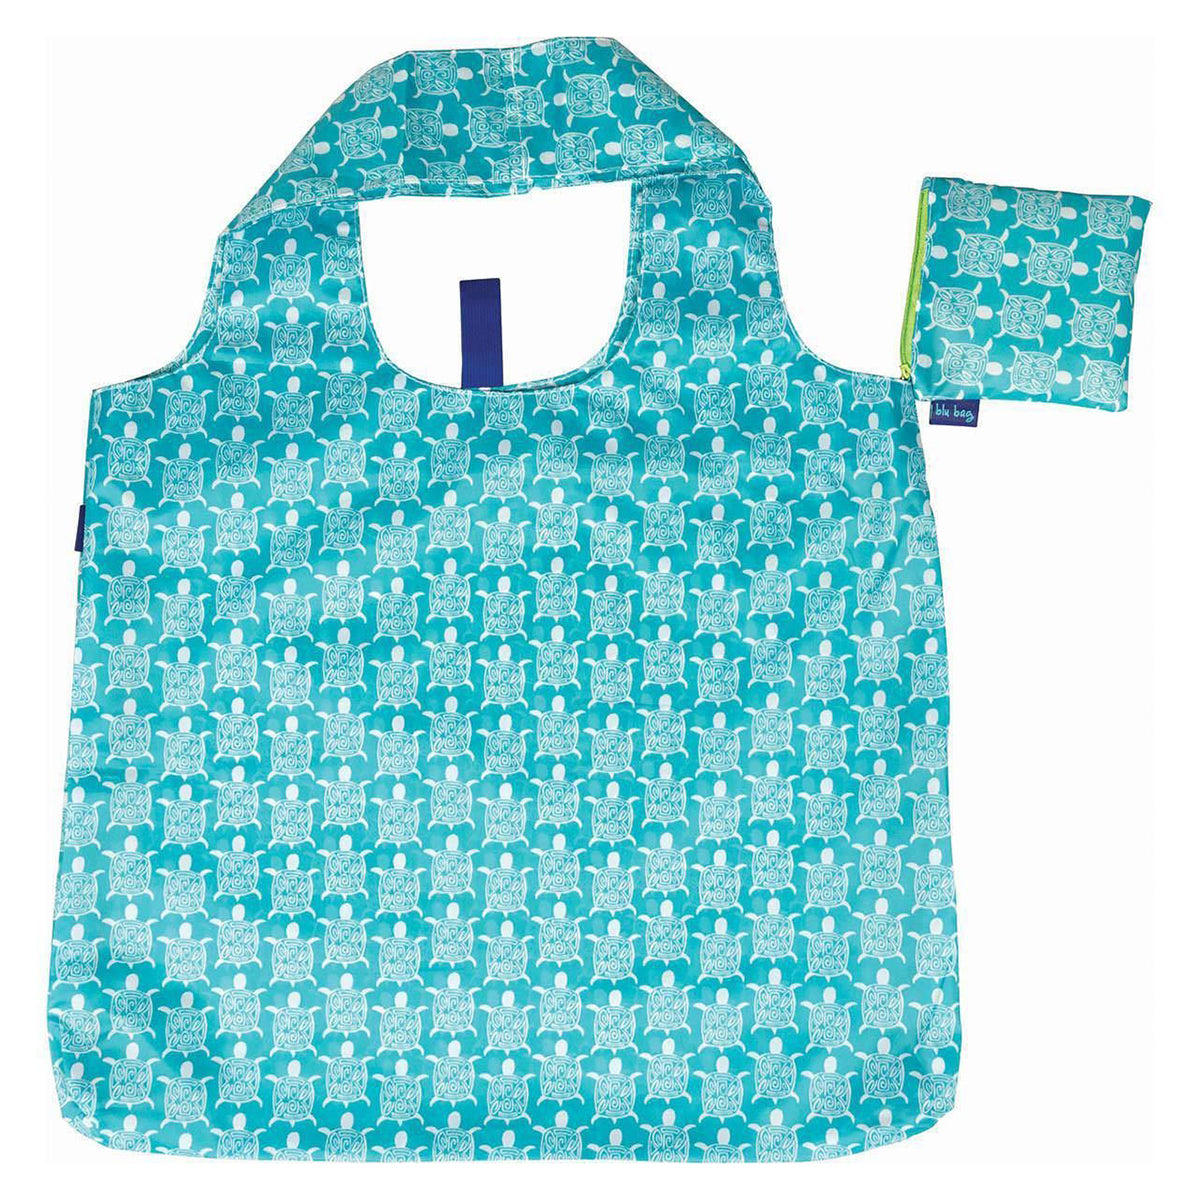 An eco-friendly reusable shopping bag in turquoise with a pattern of small green elephants, featuring a built-in pouch and a tag labeled "Rockflowerpaper" on the side.